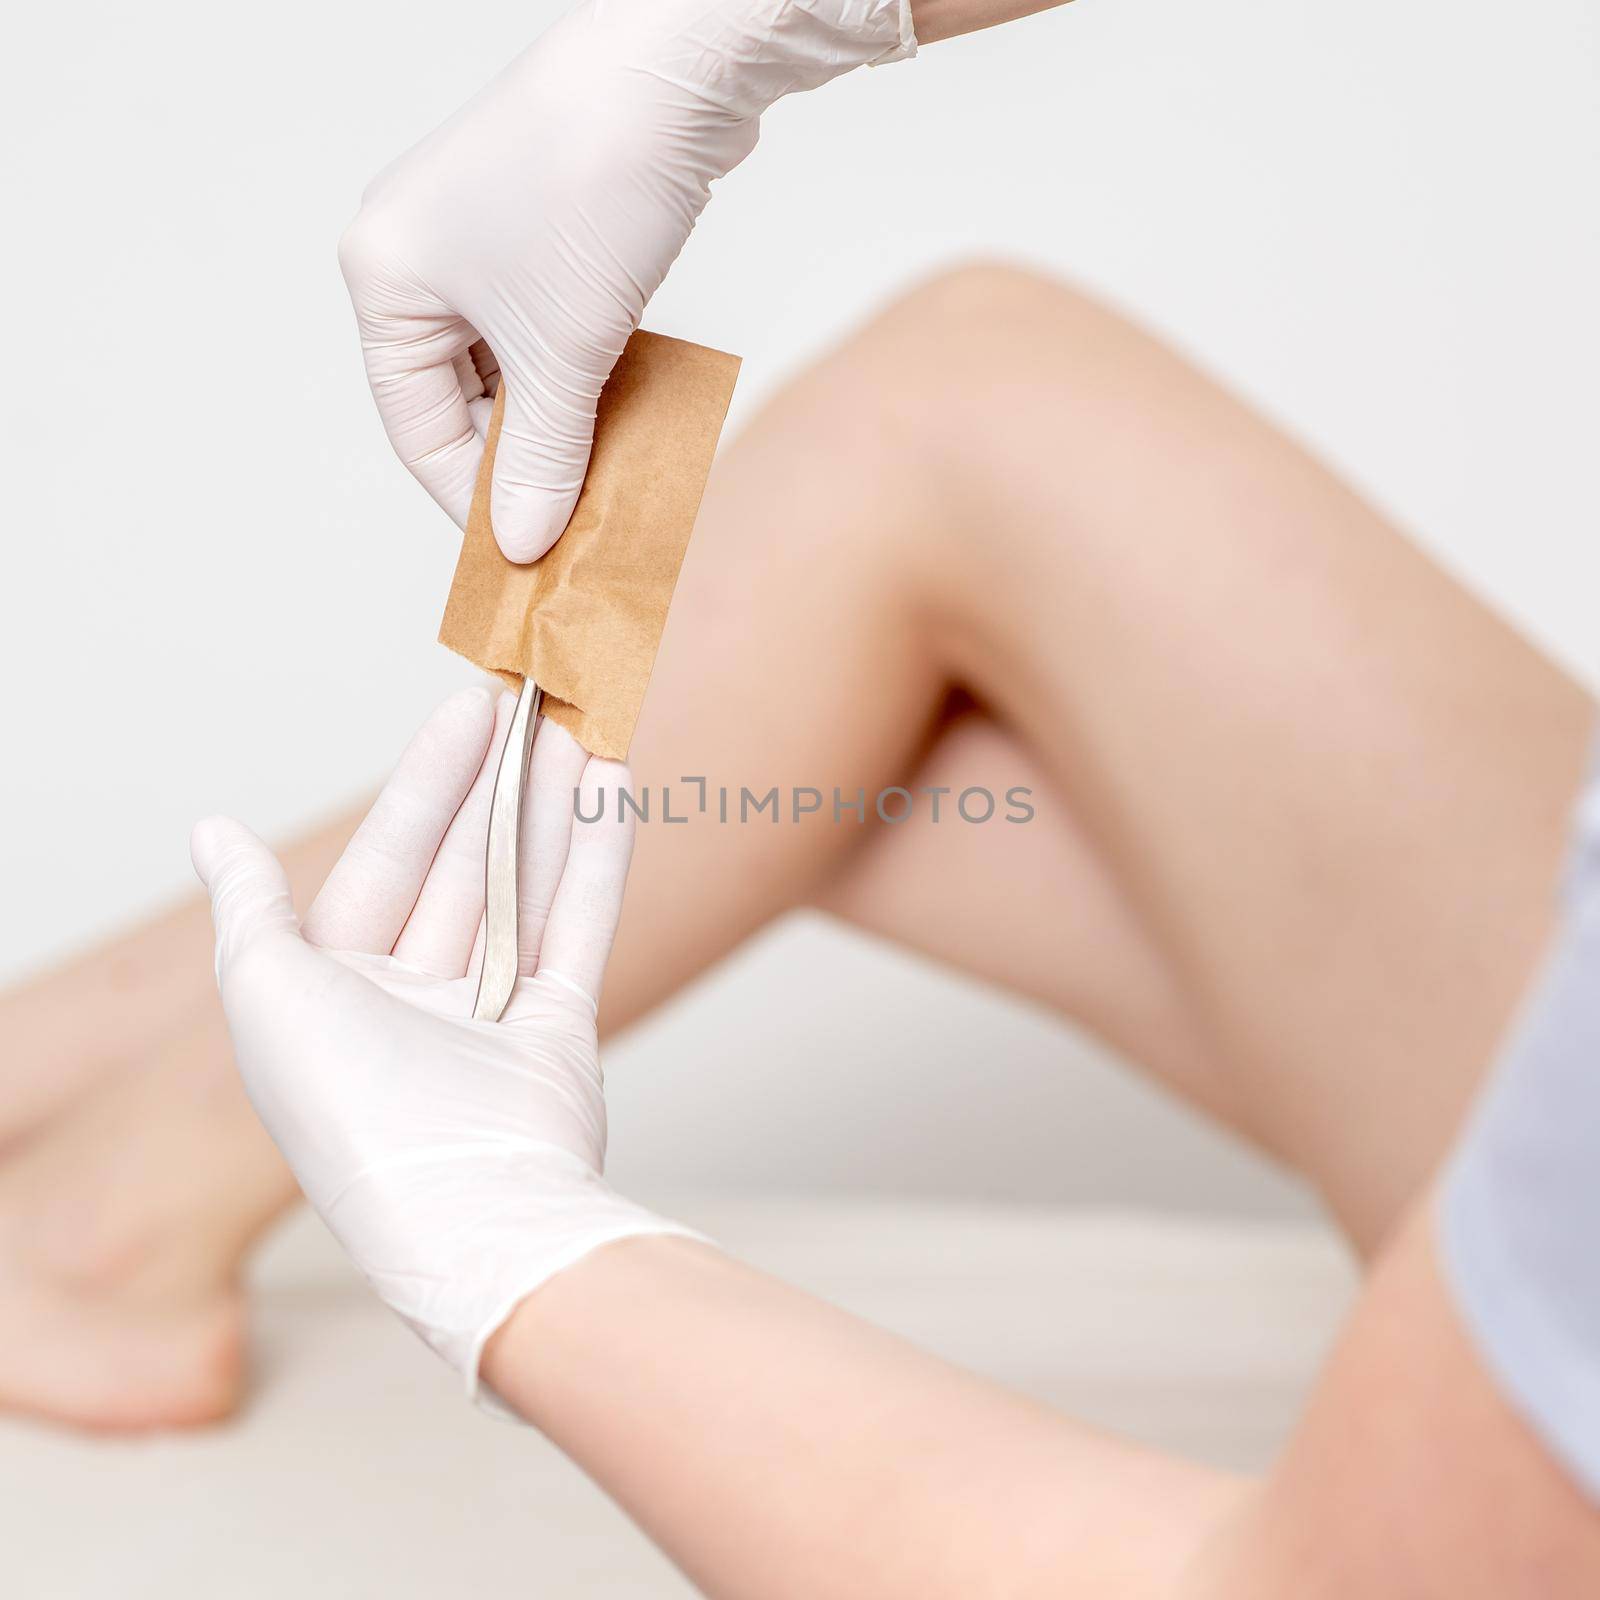 Human hands in protective gloves taking off medical or beauty tools from craft envelope before procedures on background of female legs